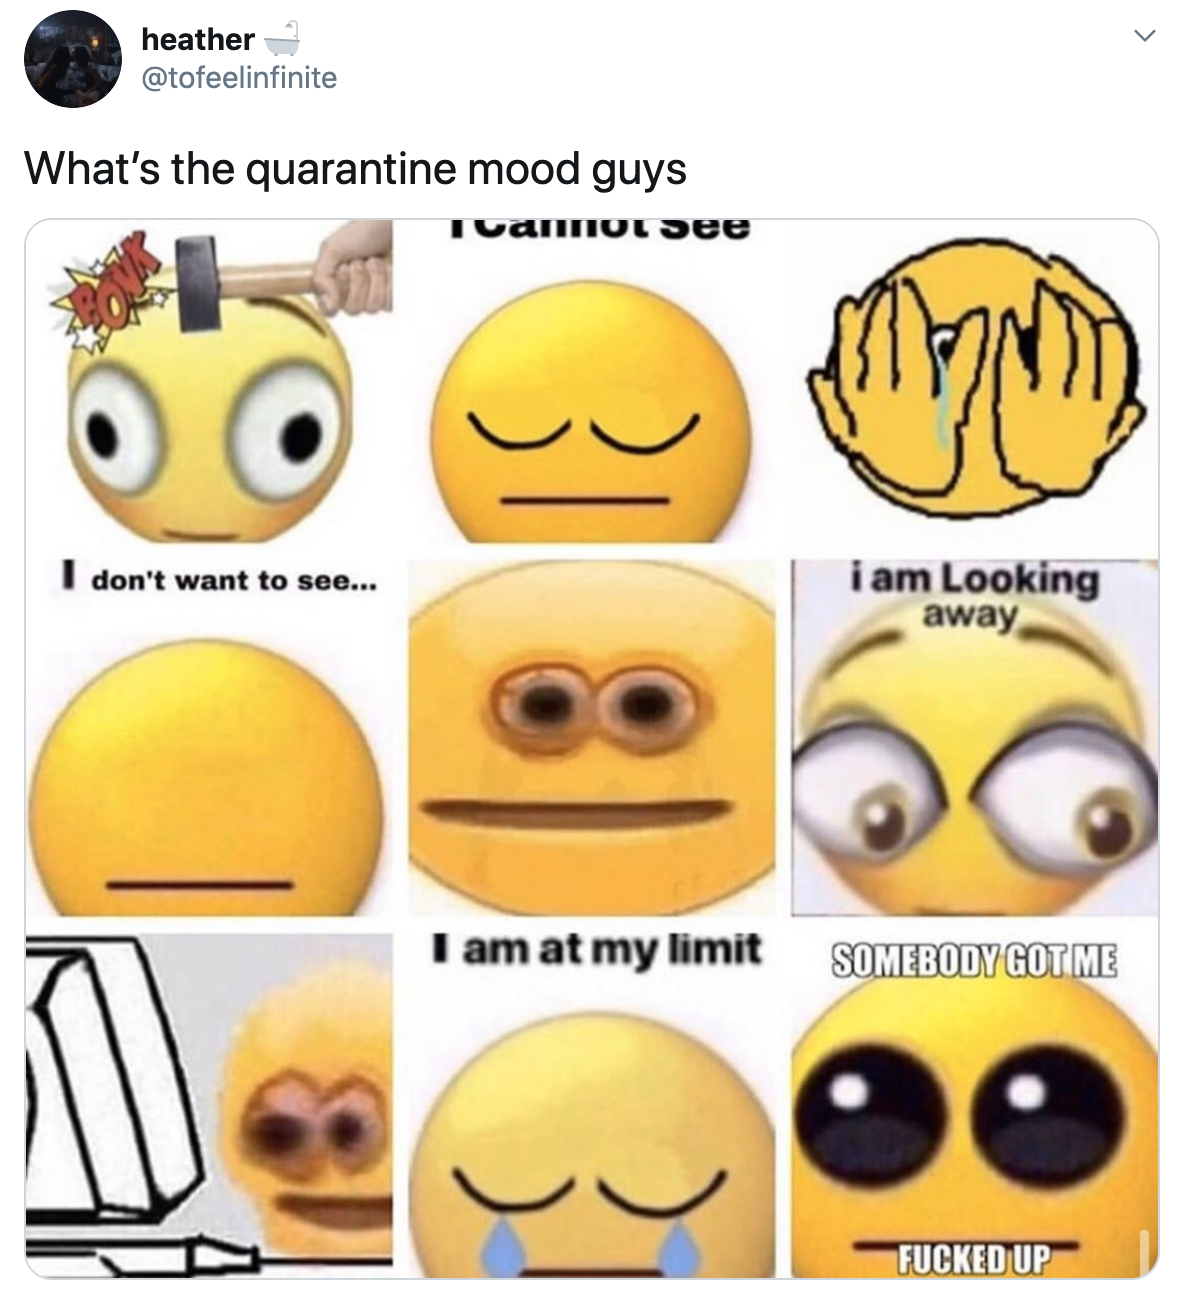 This image references the various moods were are feeling in quartine